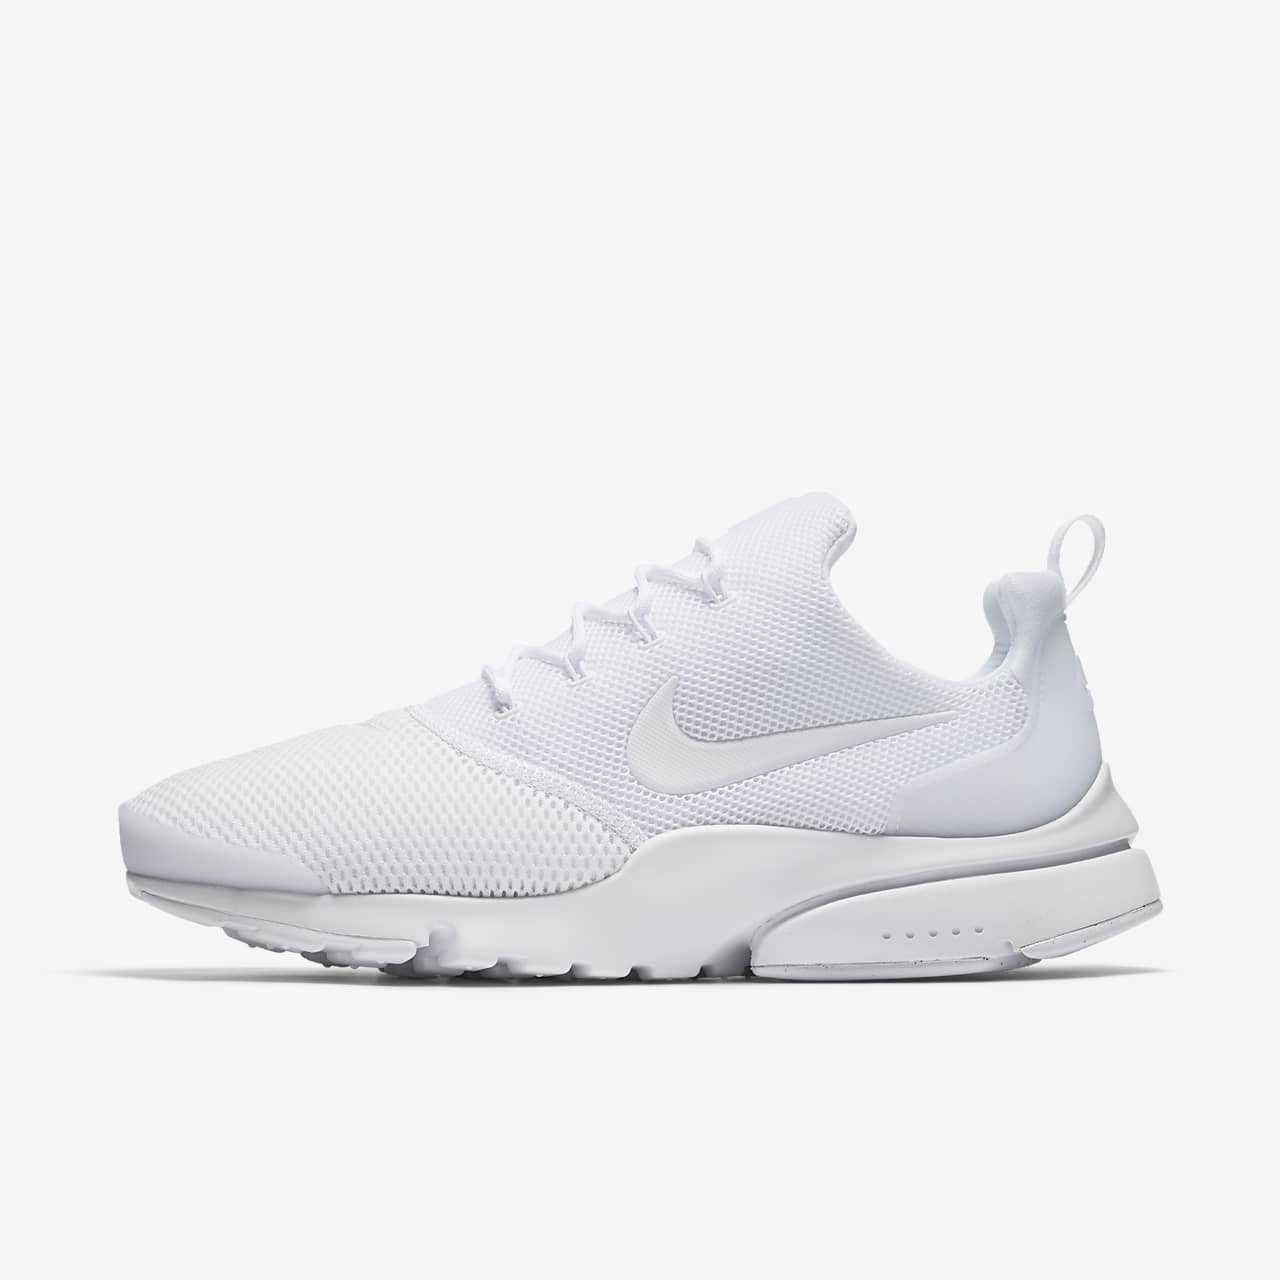 Chaussure Nike Presto Fly pour Homme